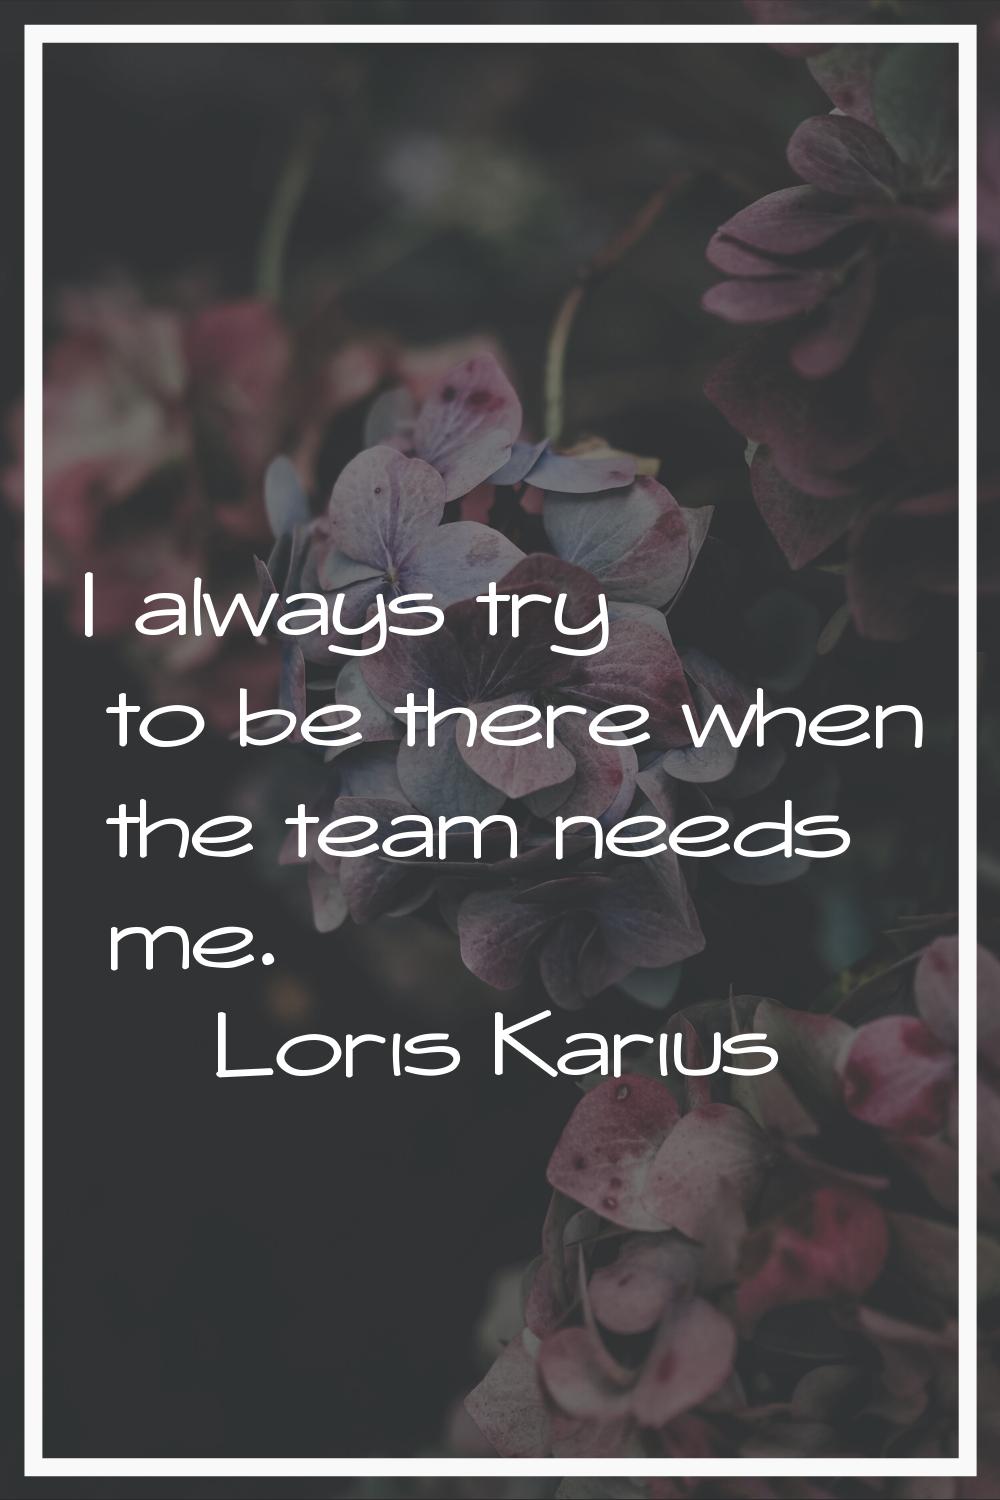 I always try to be there when the team needs me.